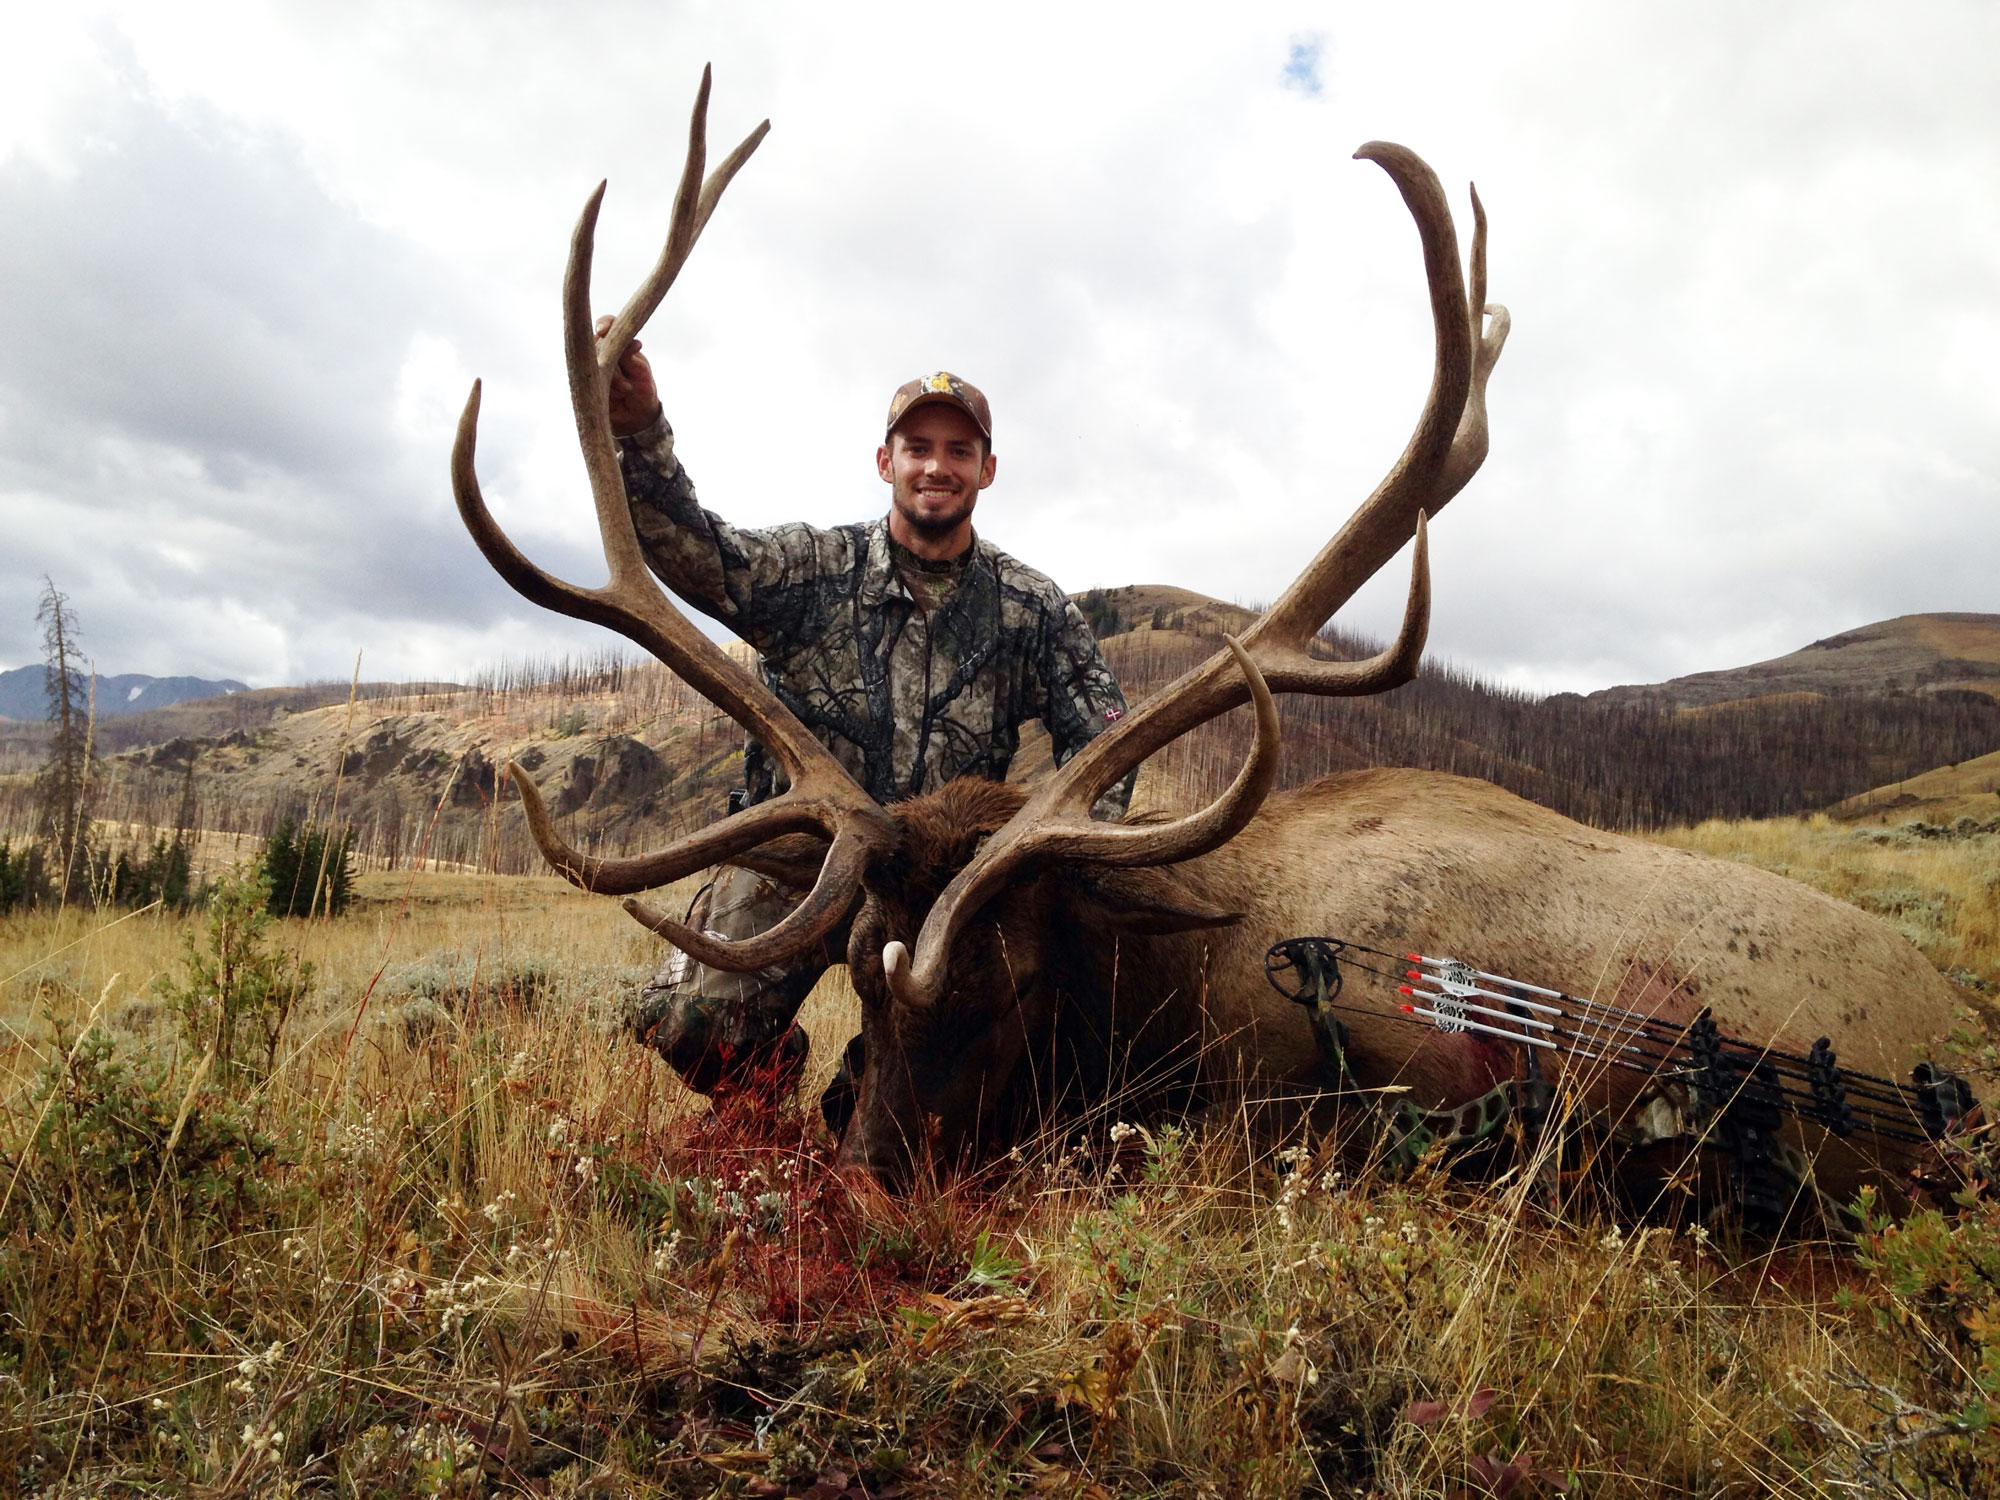 All In: A Gamble Between a Big Elk and Potentially Dangerous Conditions